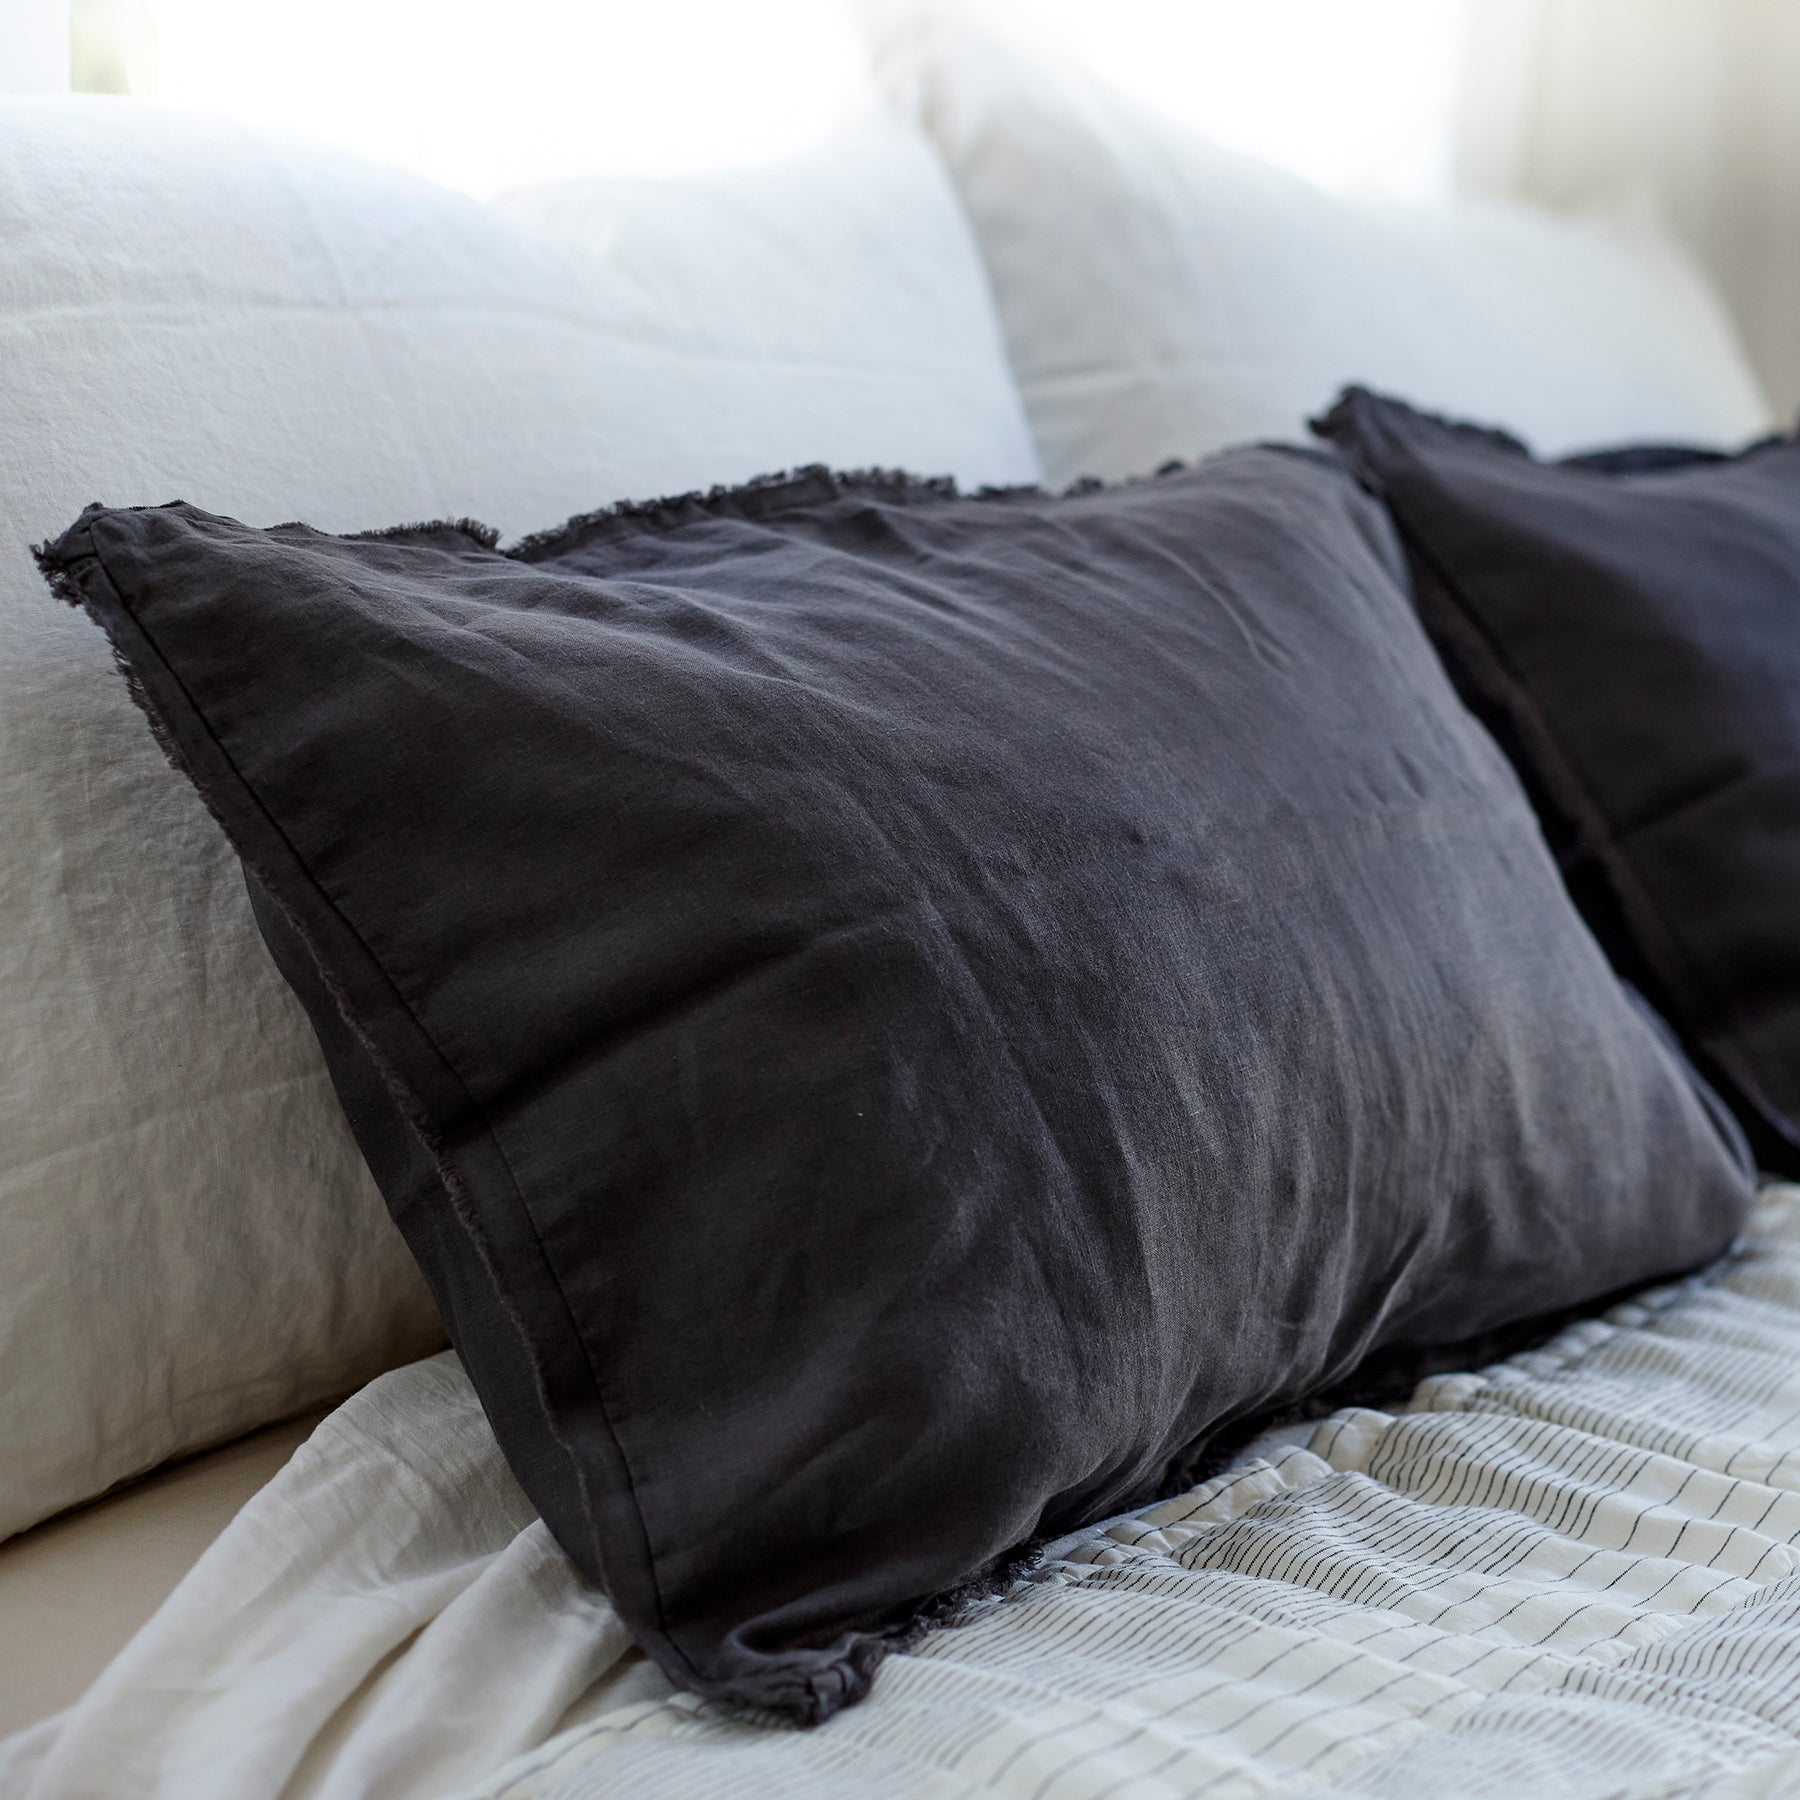 Pair of Linen Pillowcases in Dark Charcoal